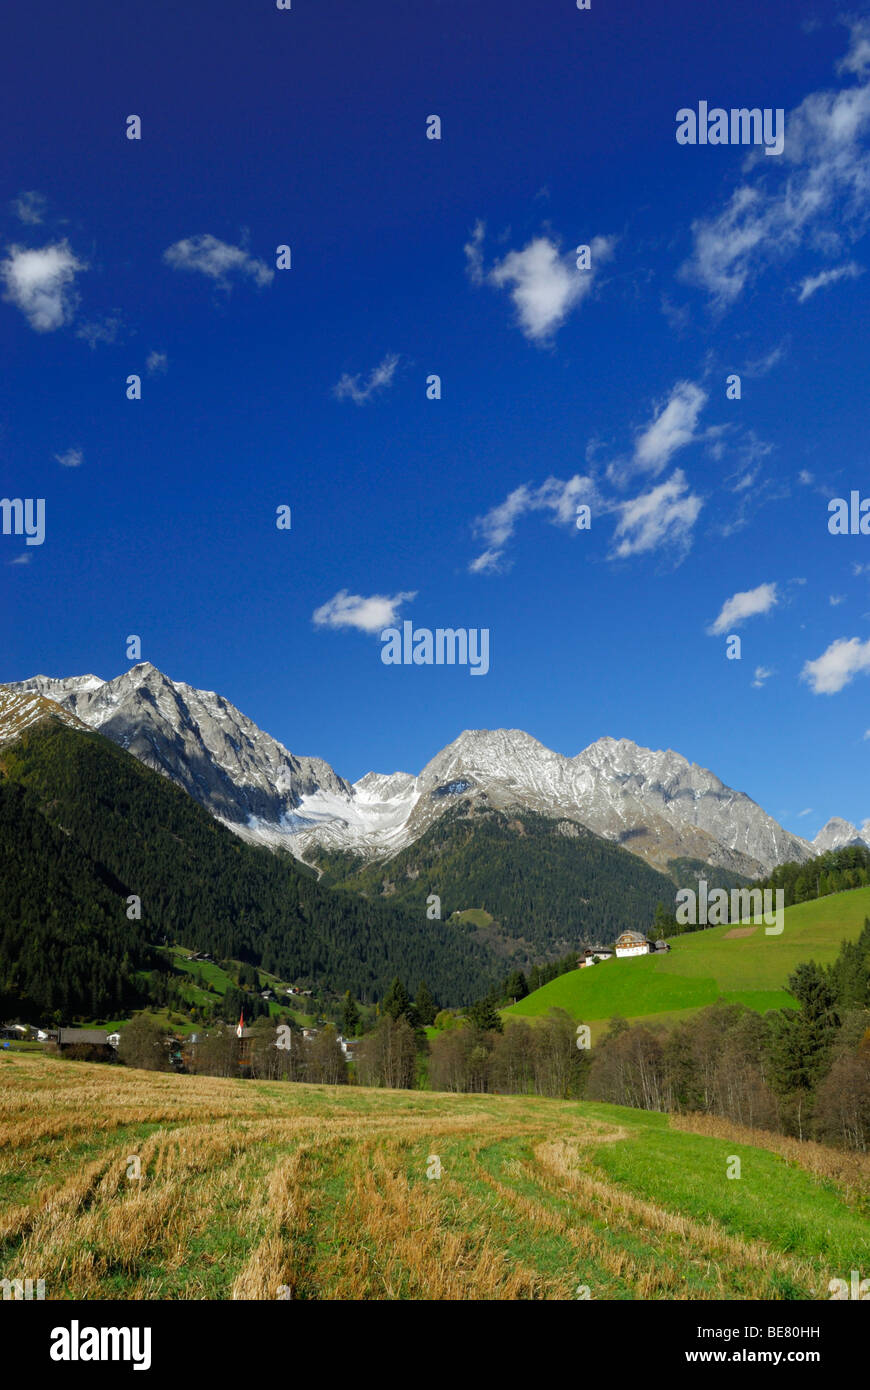 Valley Antholzer Tal with Riesenfernergruppe range, South Tyrol, Italy Stock Photo